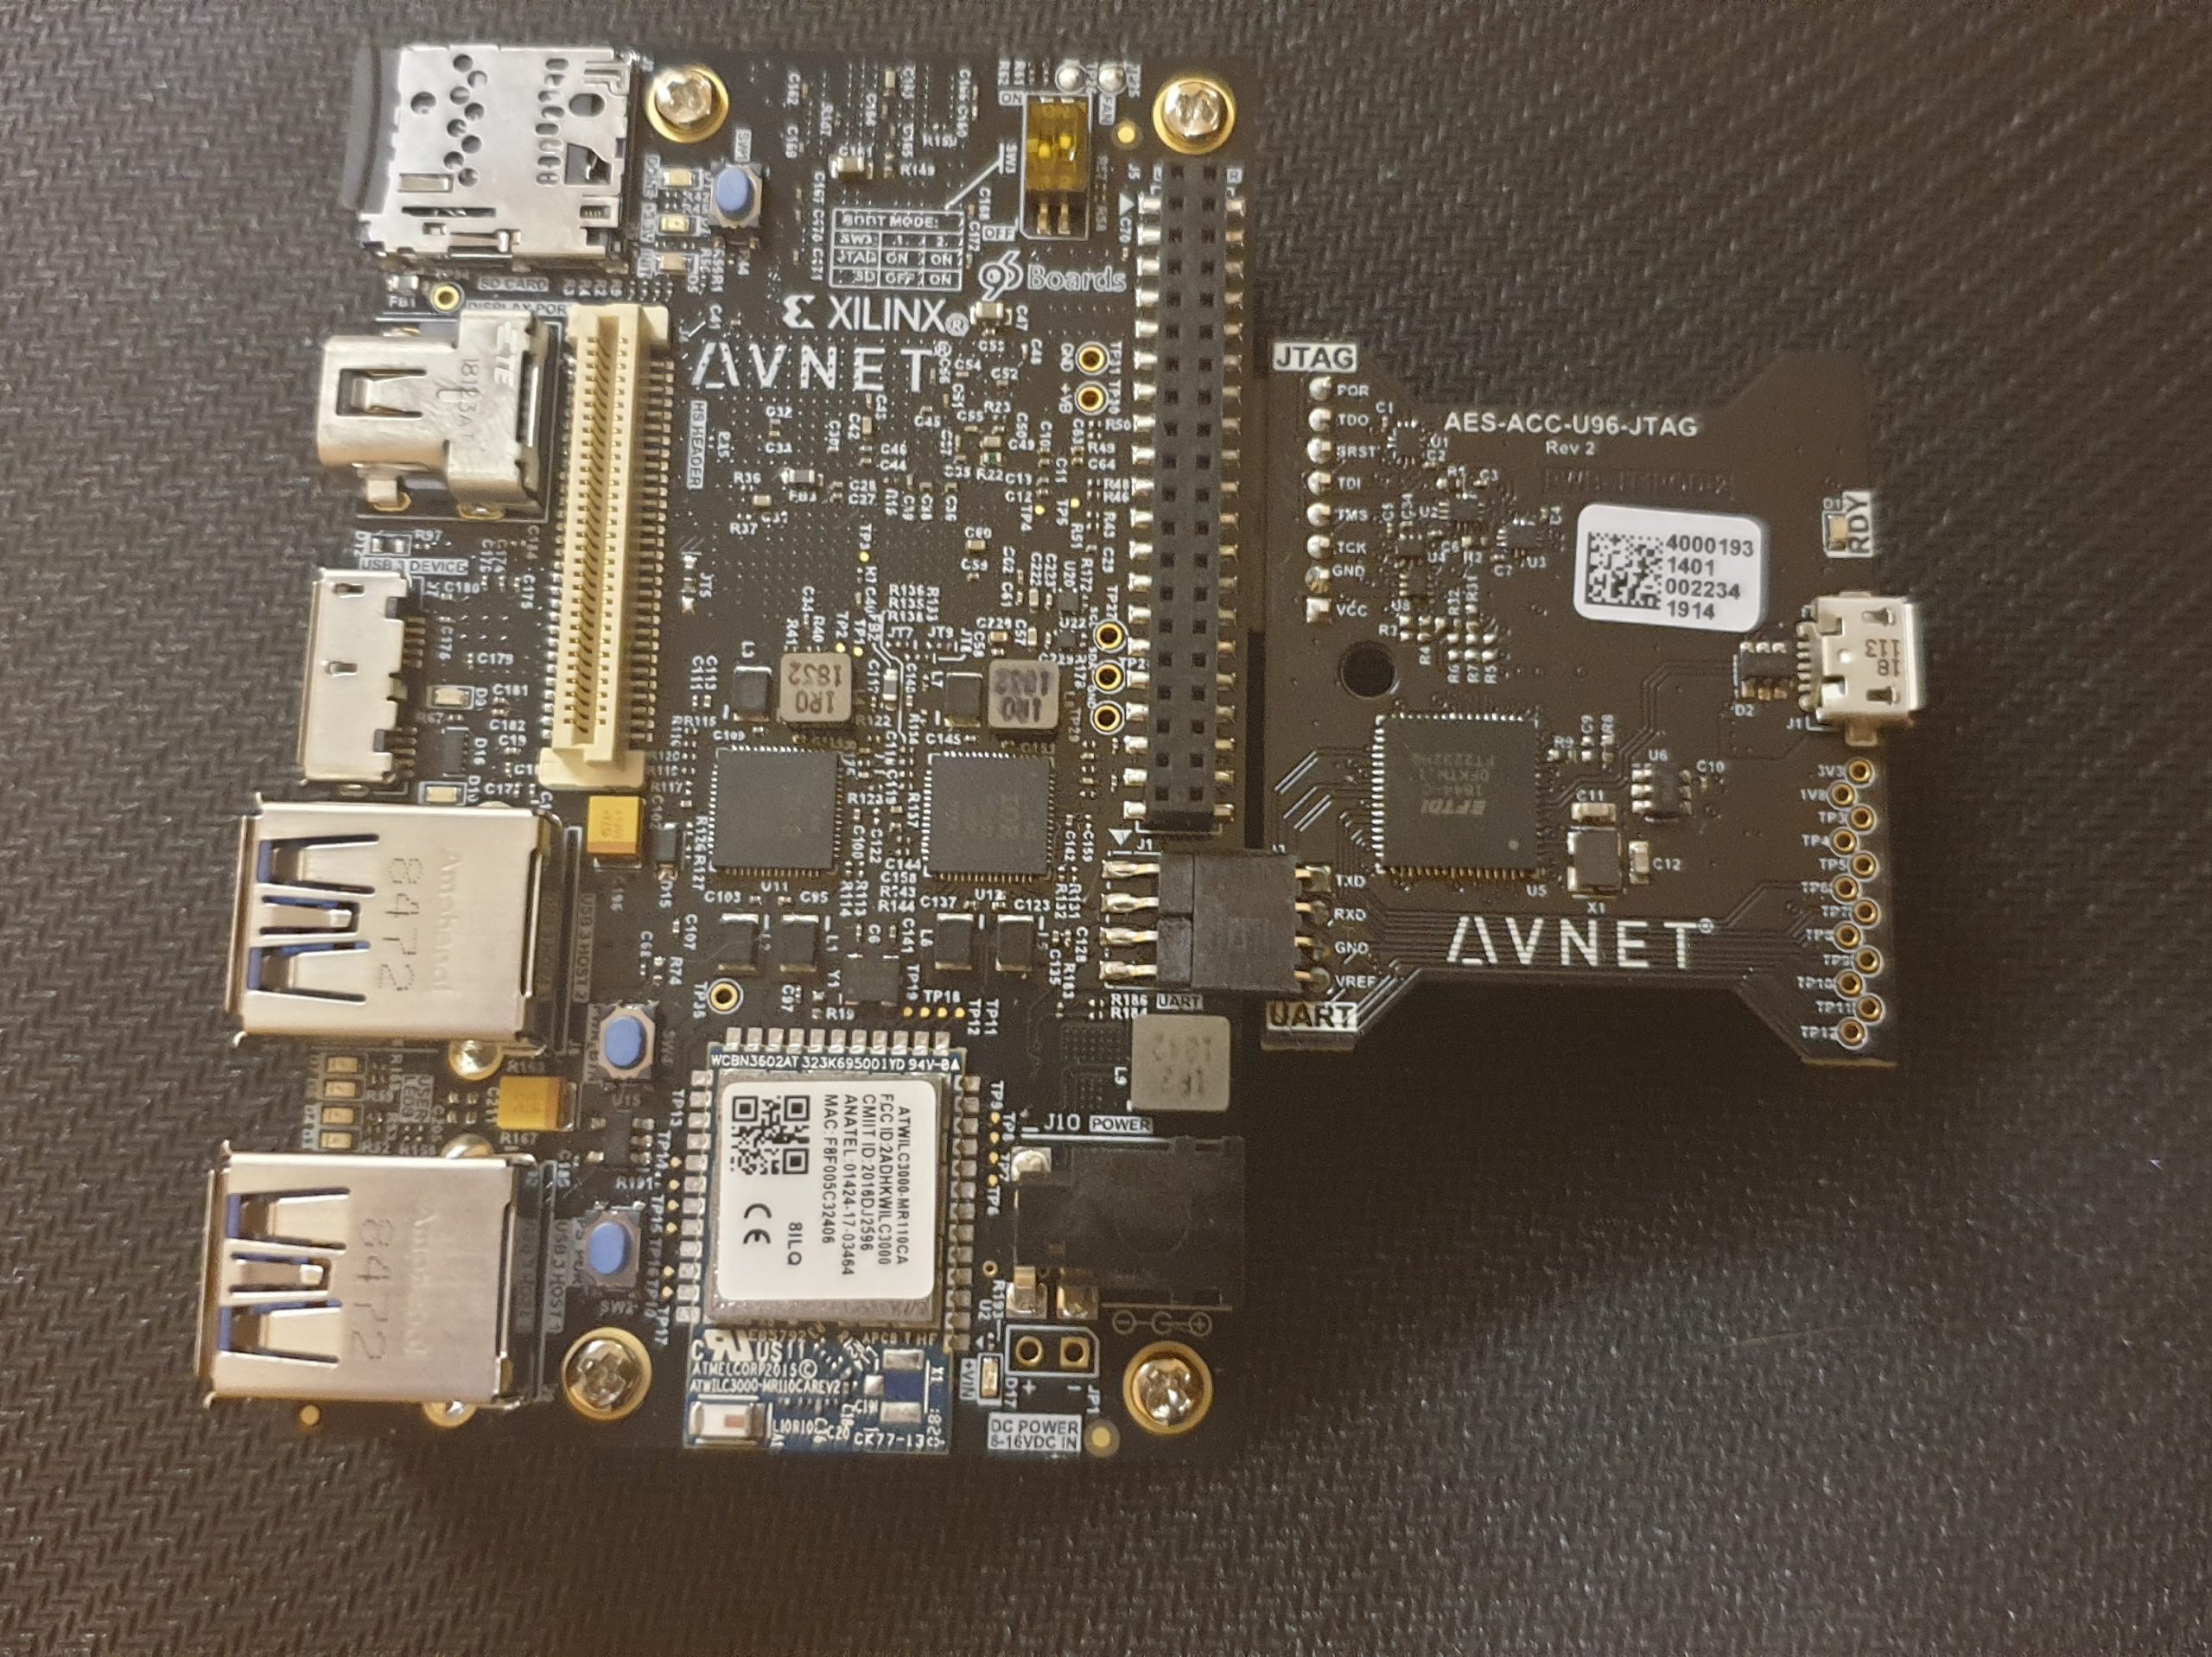 Designs based on the Ultra96-v2 card developed by AVNET incorporating an Xilinx FPGA.